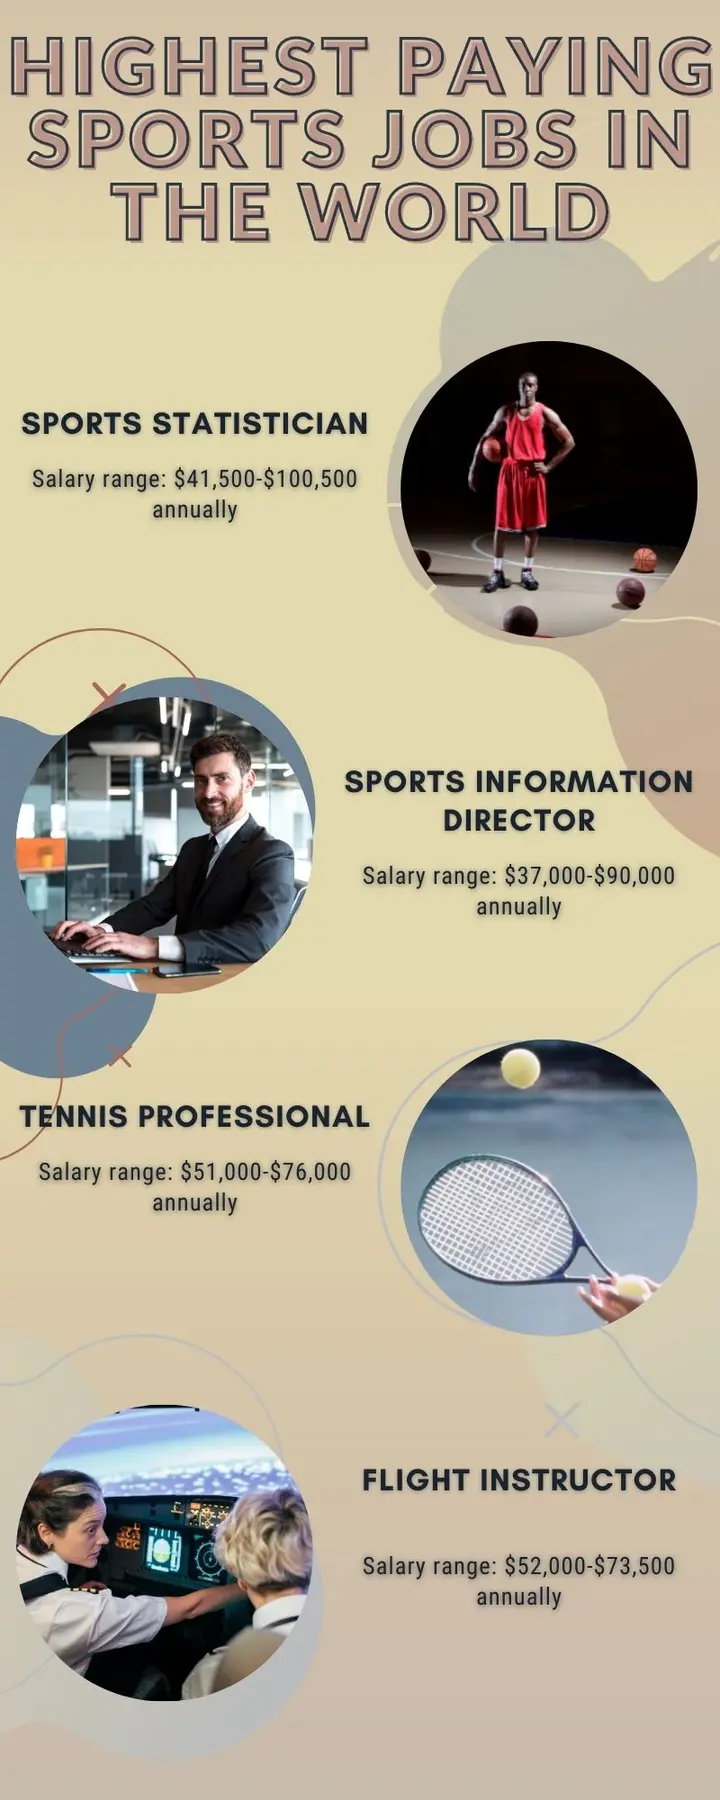 Highest paying sports jobs in the world